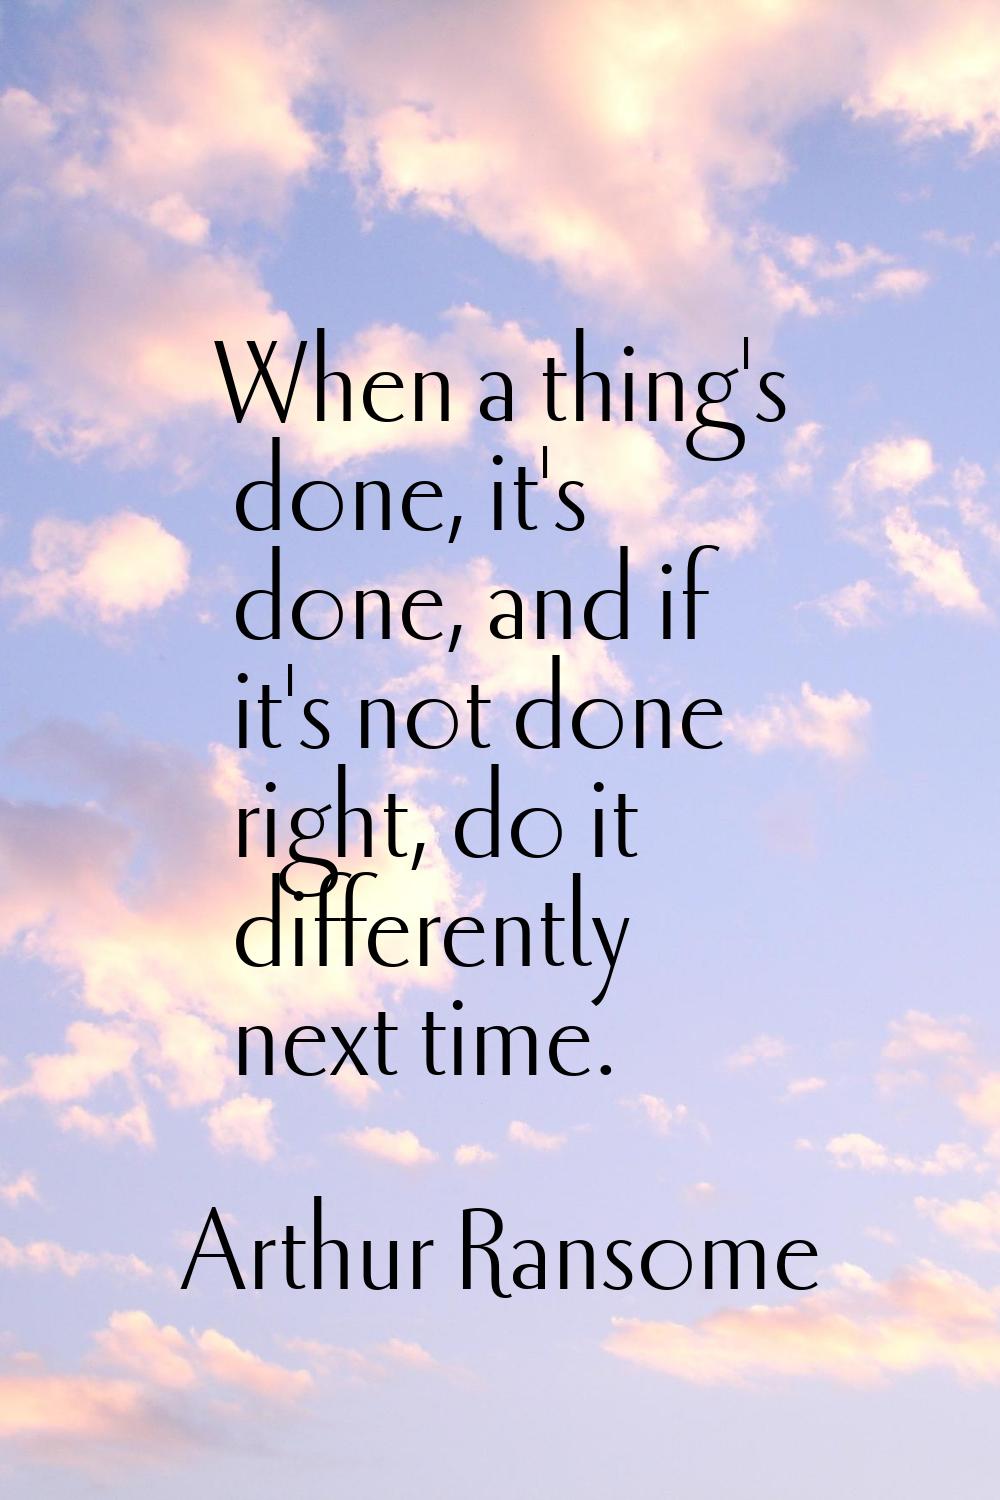 When a thing's done, it's done, and if it's not done right, do it differently next time.